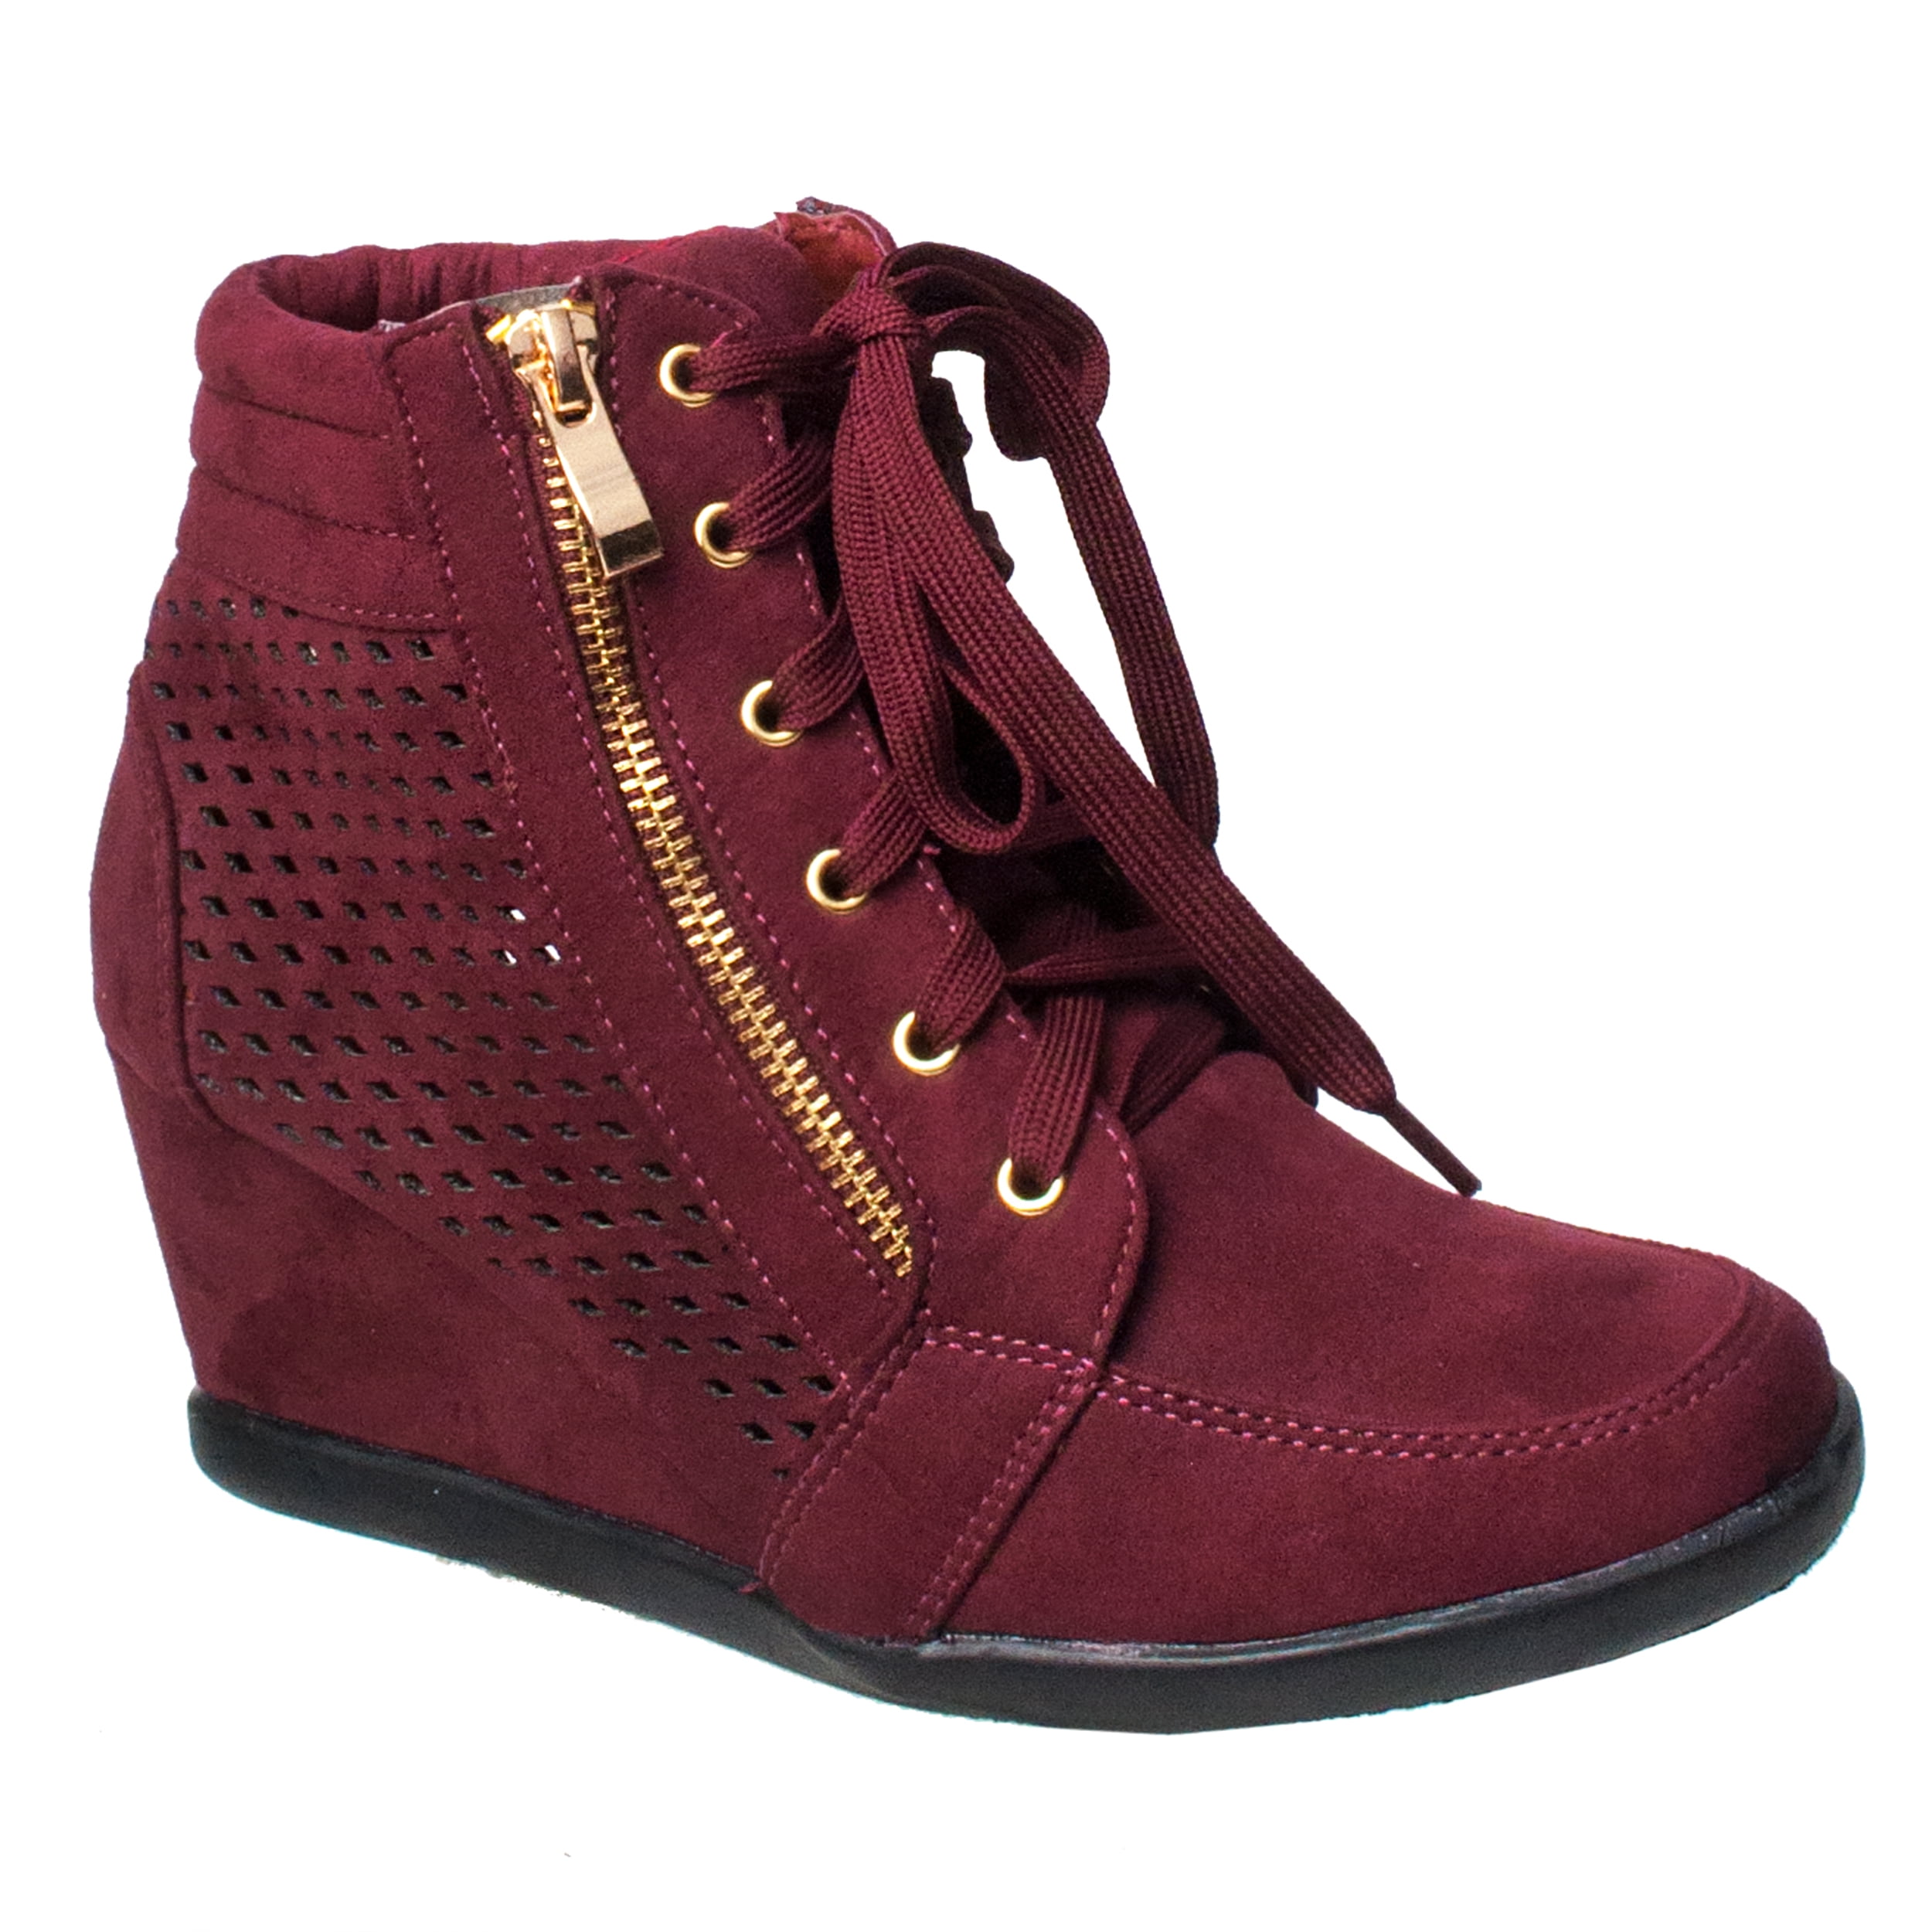 Details about  / Women Hidden Wedge Heel Sneakers Ankle Booties Boots Platform High Top Lace Up